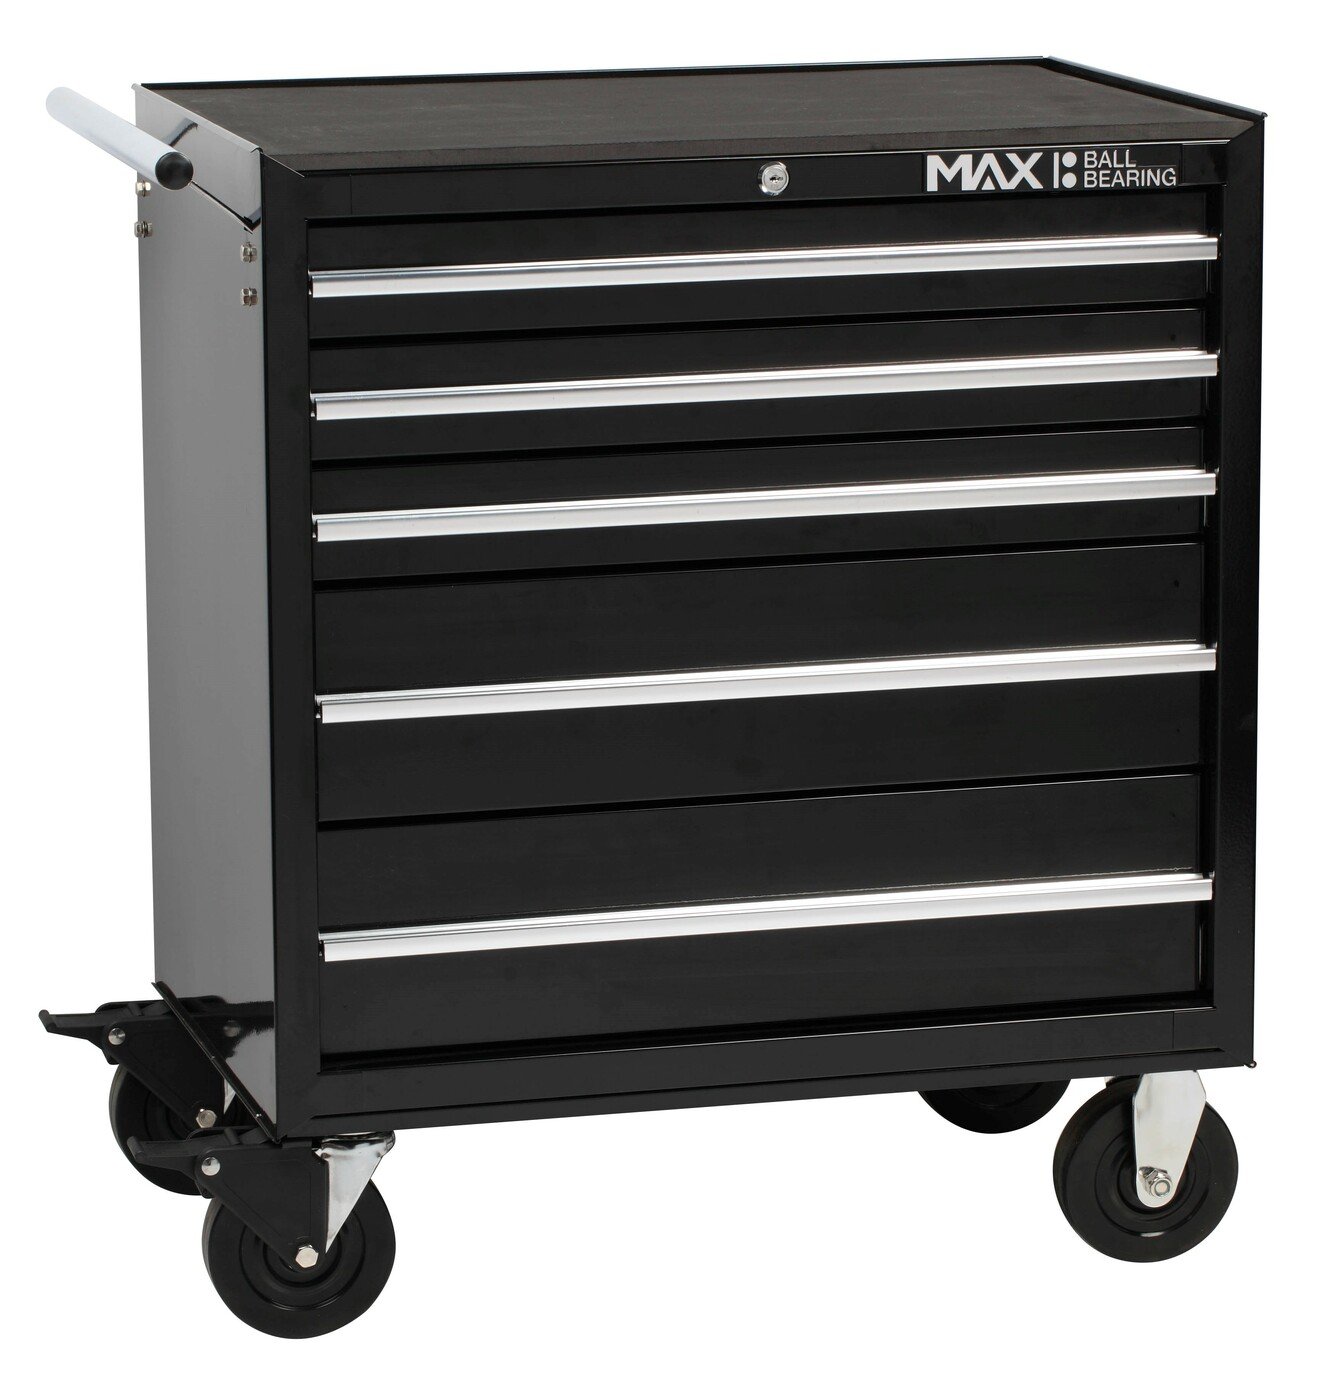 5 Drawer Rollaway Tool Cabinet.